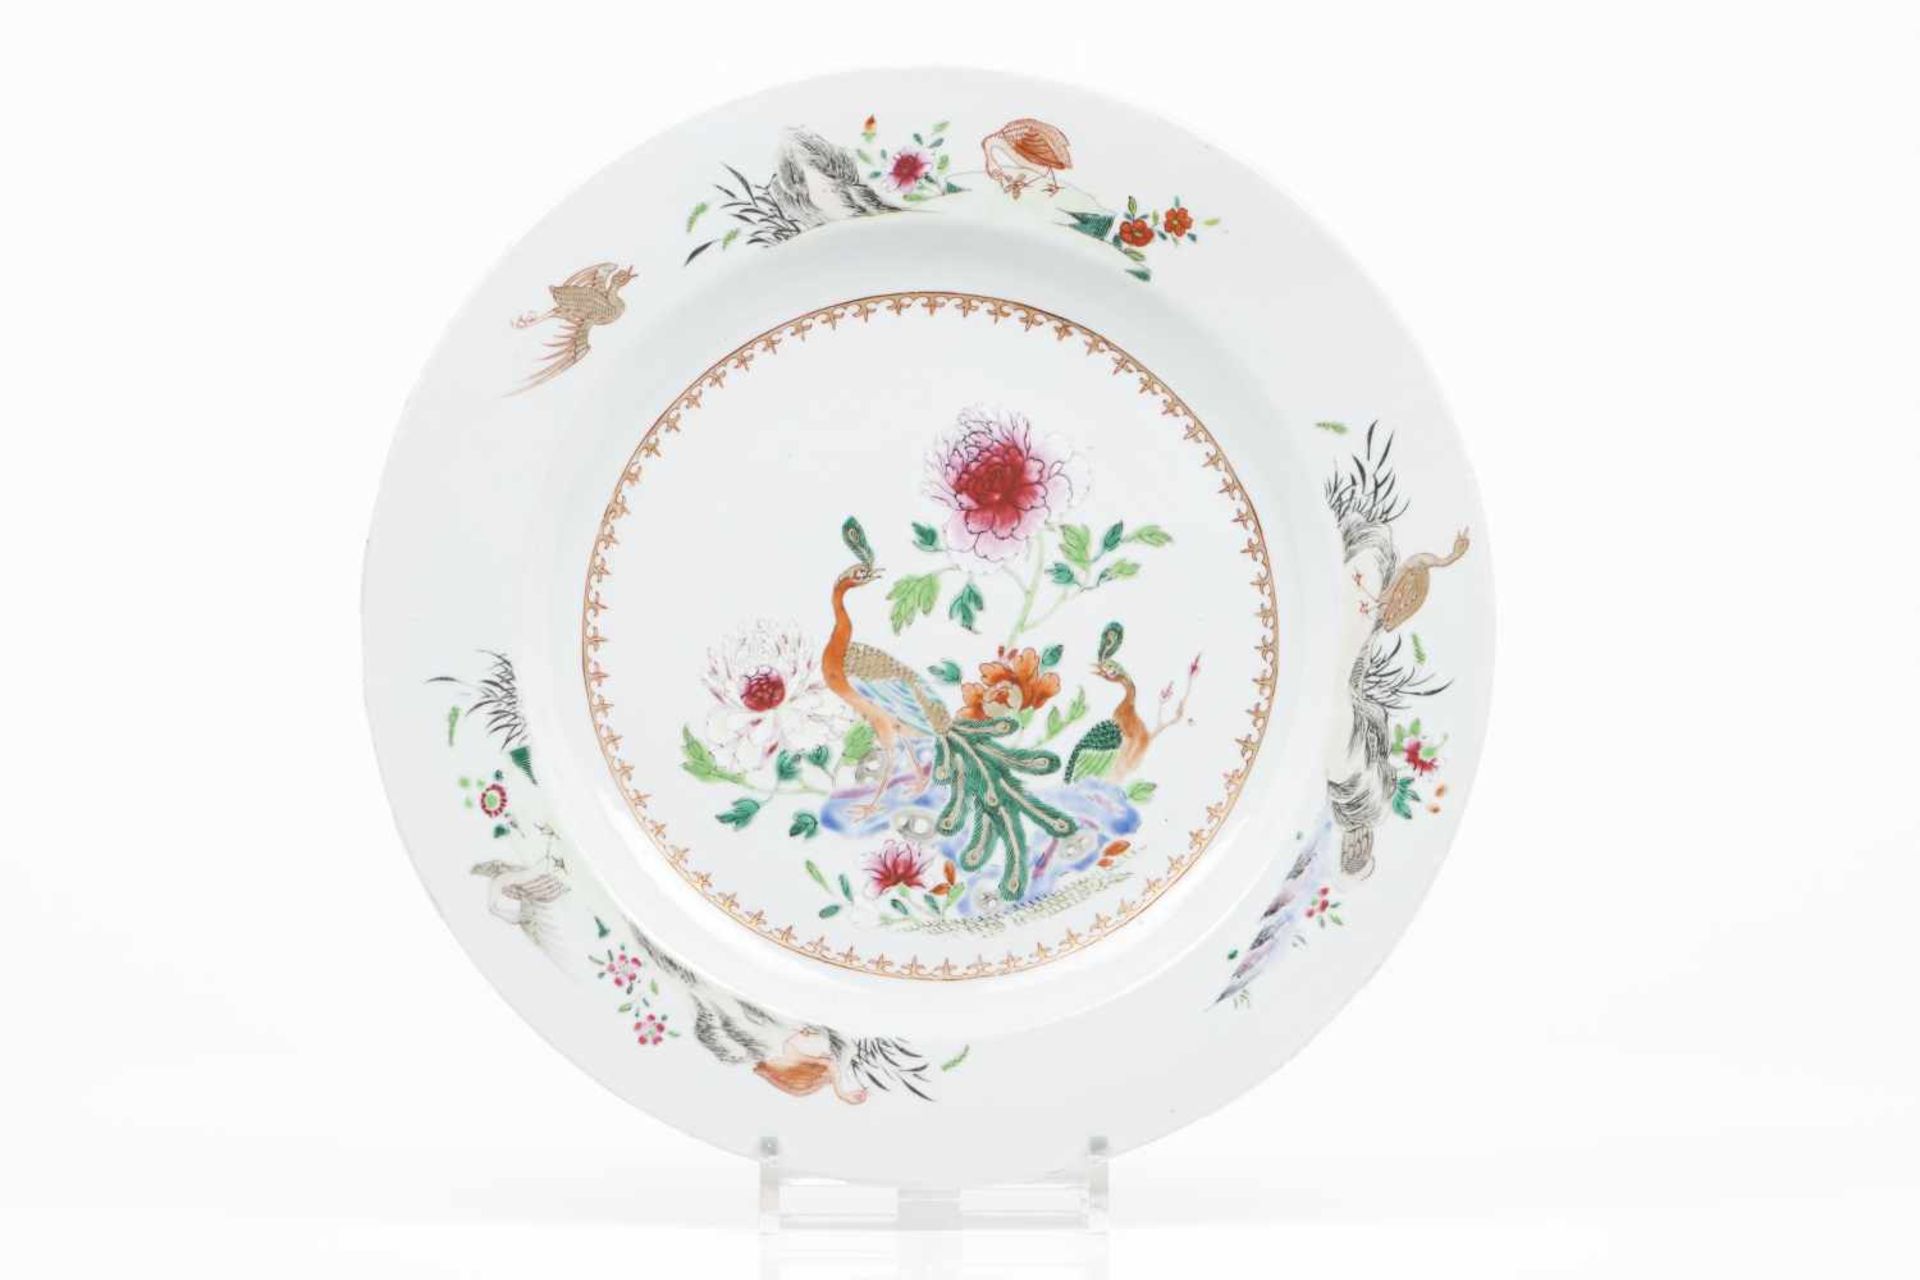 A large plateChinese export porcelain"Famille Rose" enamelled decoration of landscape with